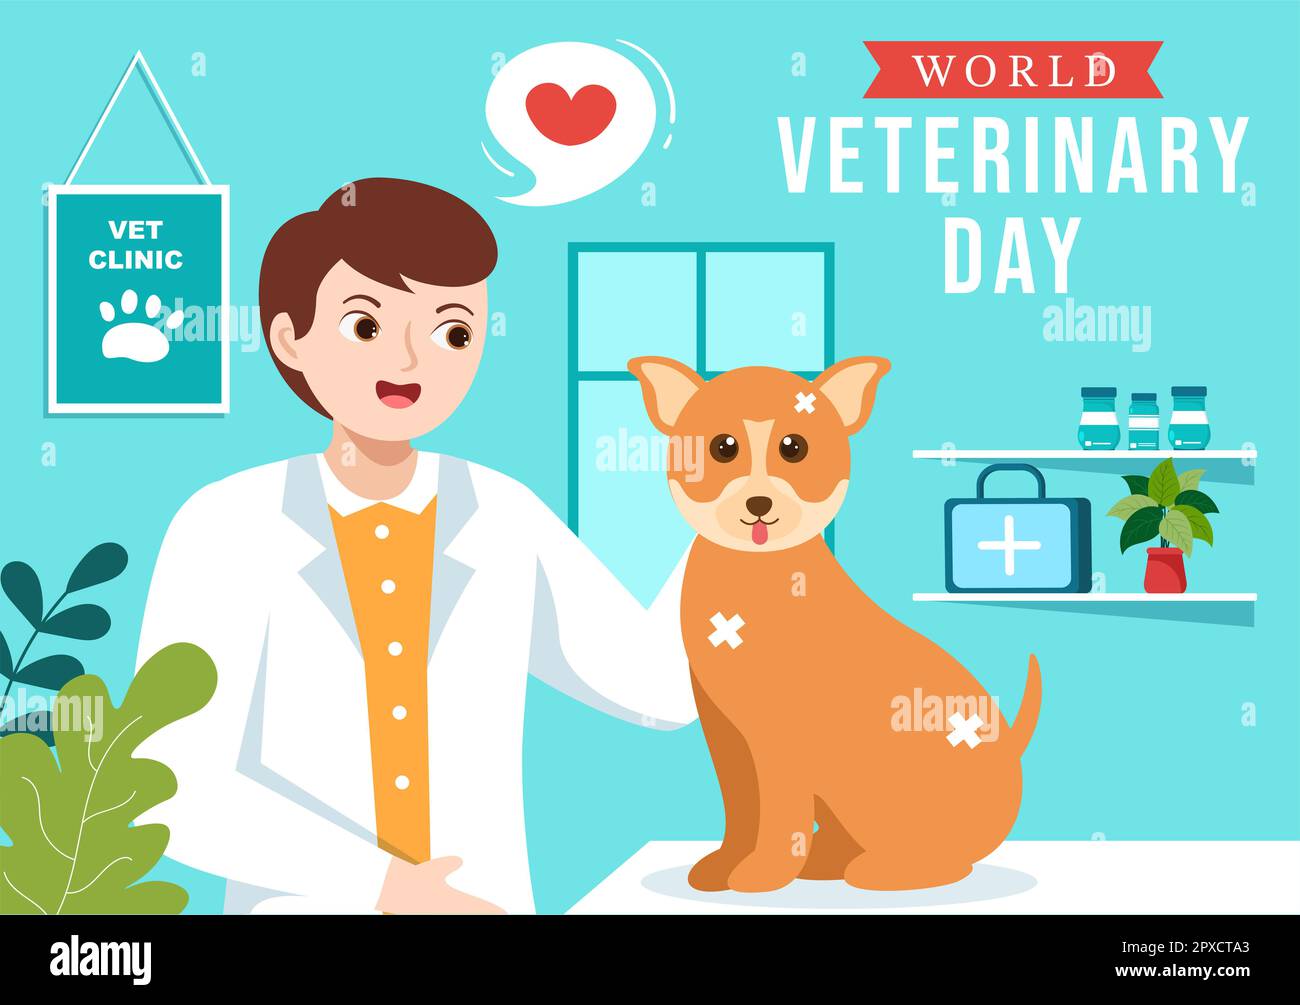 World Veterinary Day on April 29 Illustration with Doctor and Cute ...